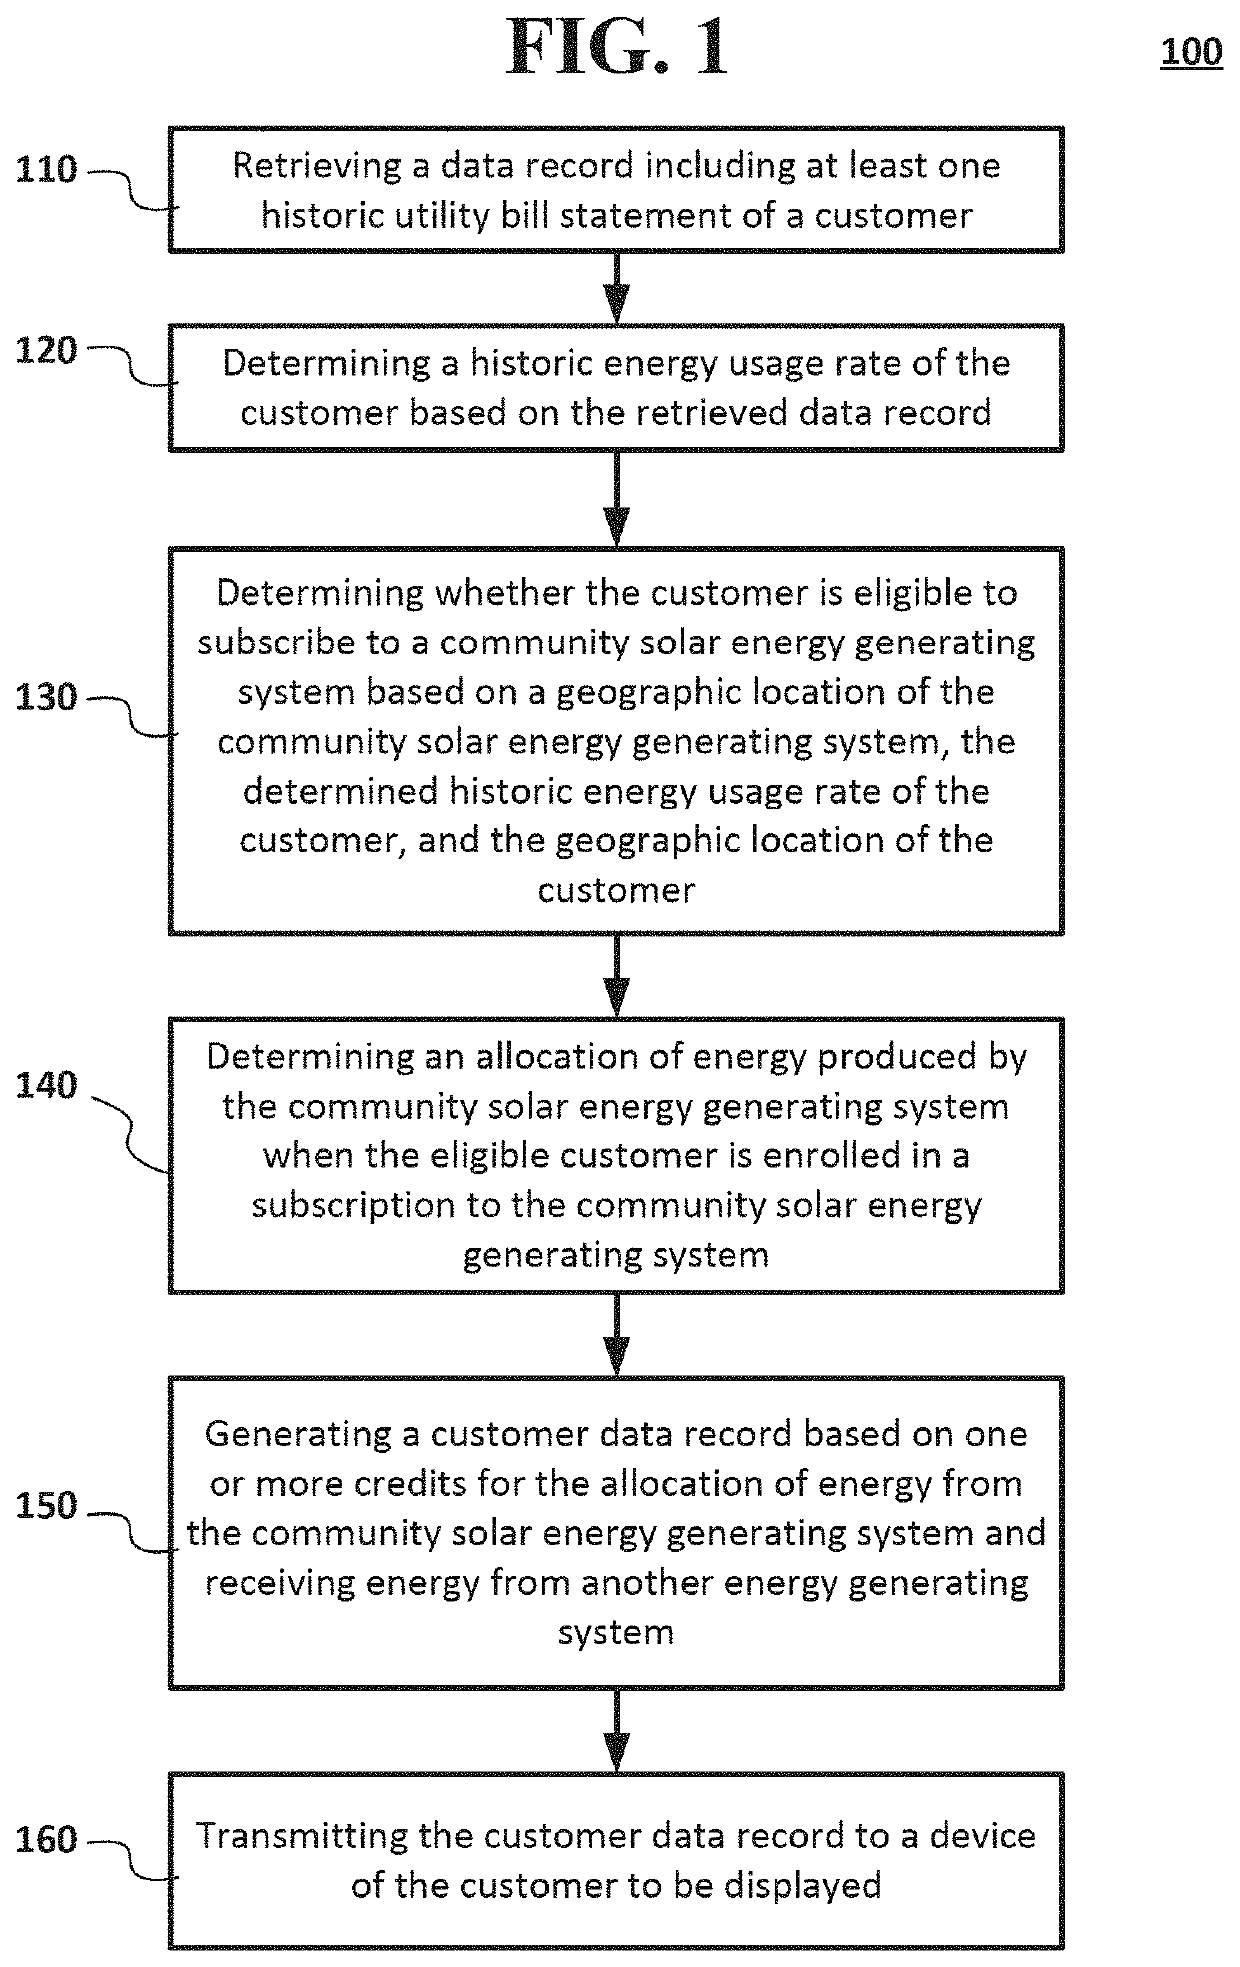 Methods of allocating energy generated by a community solar energy system